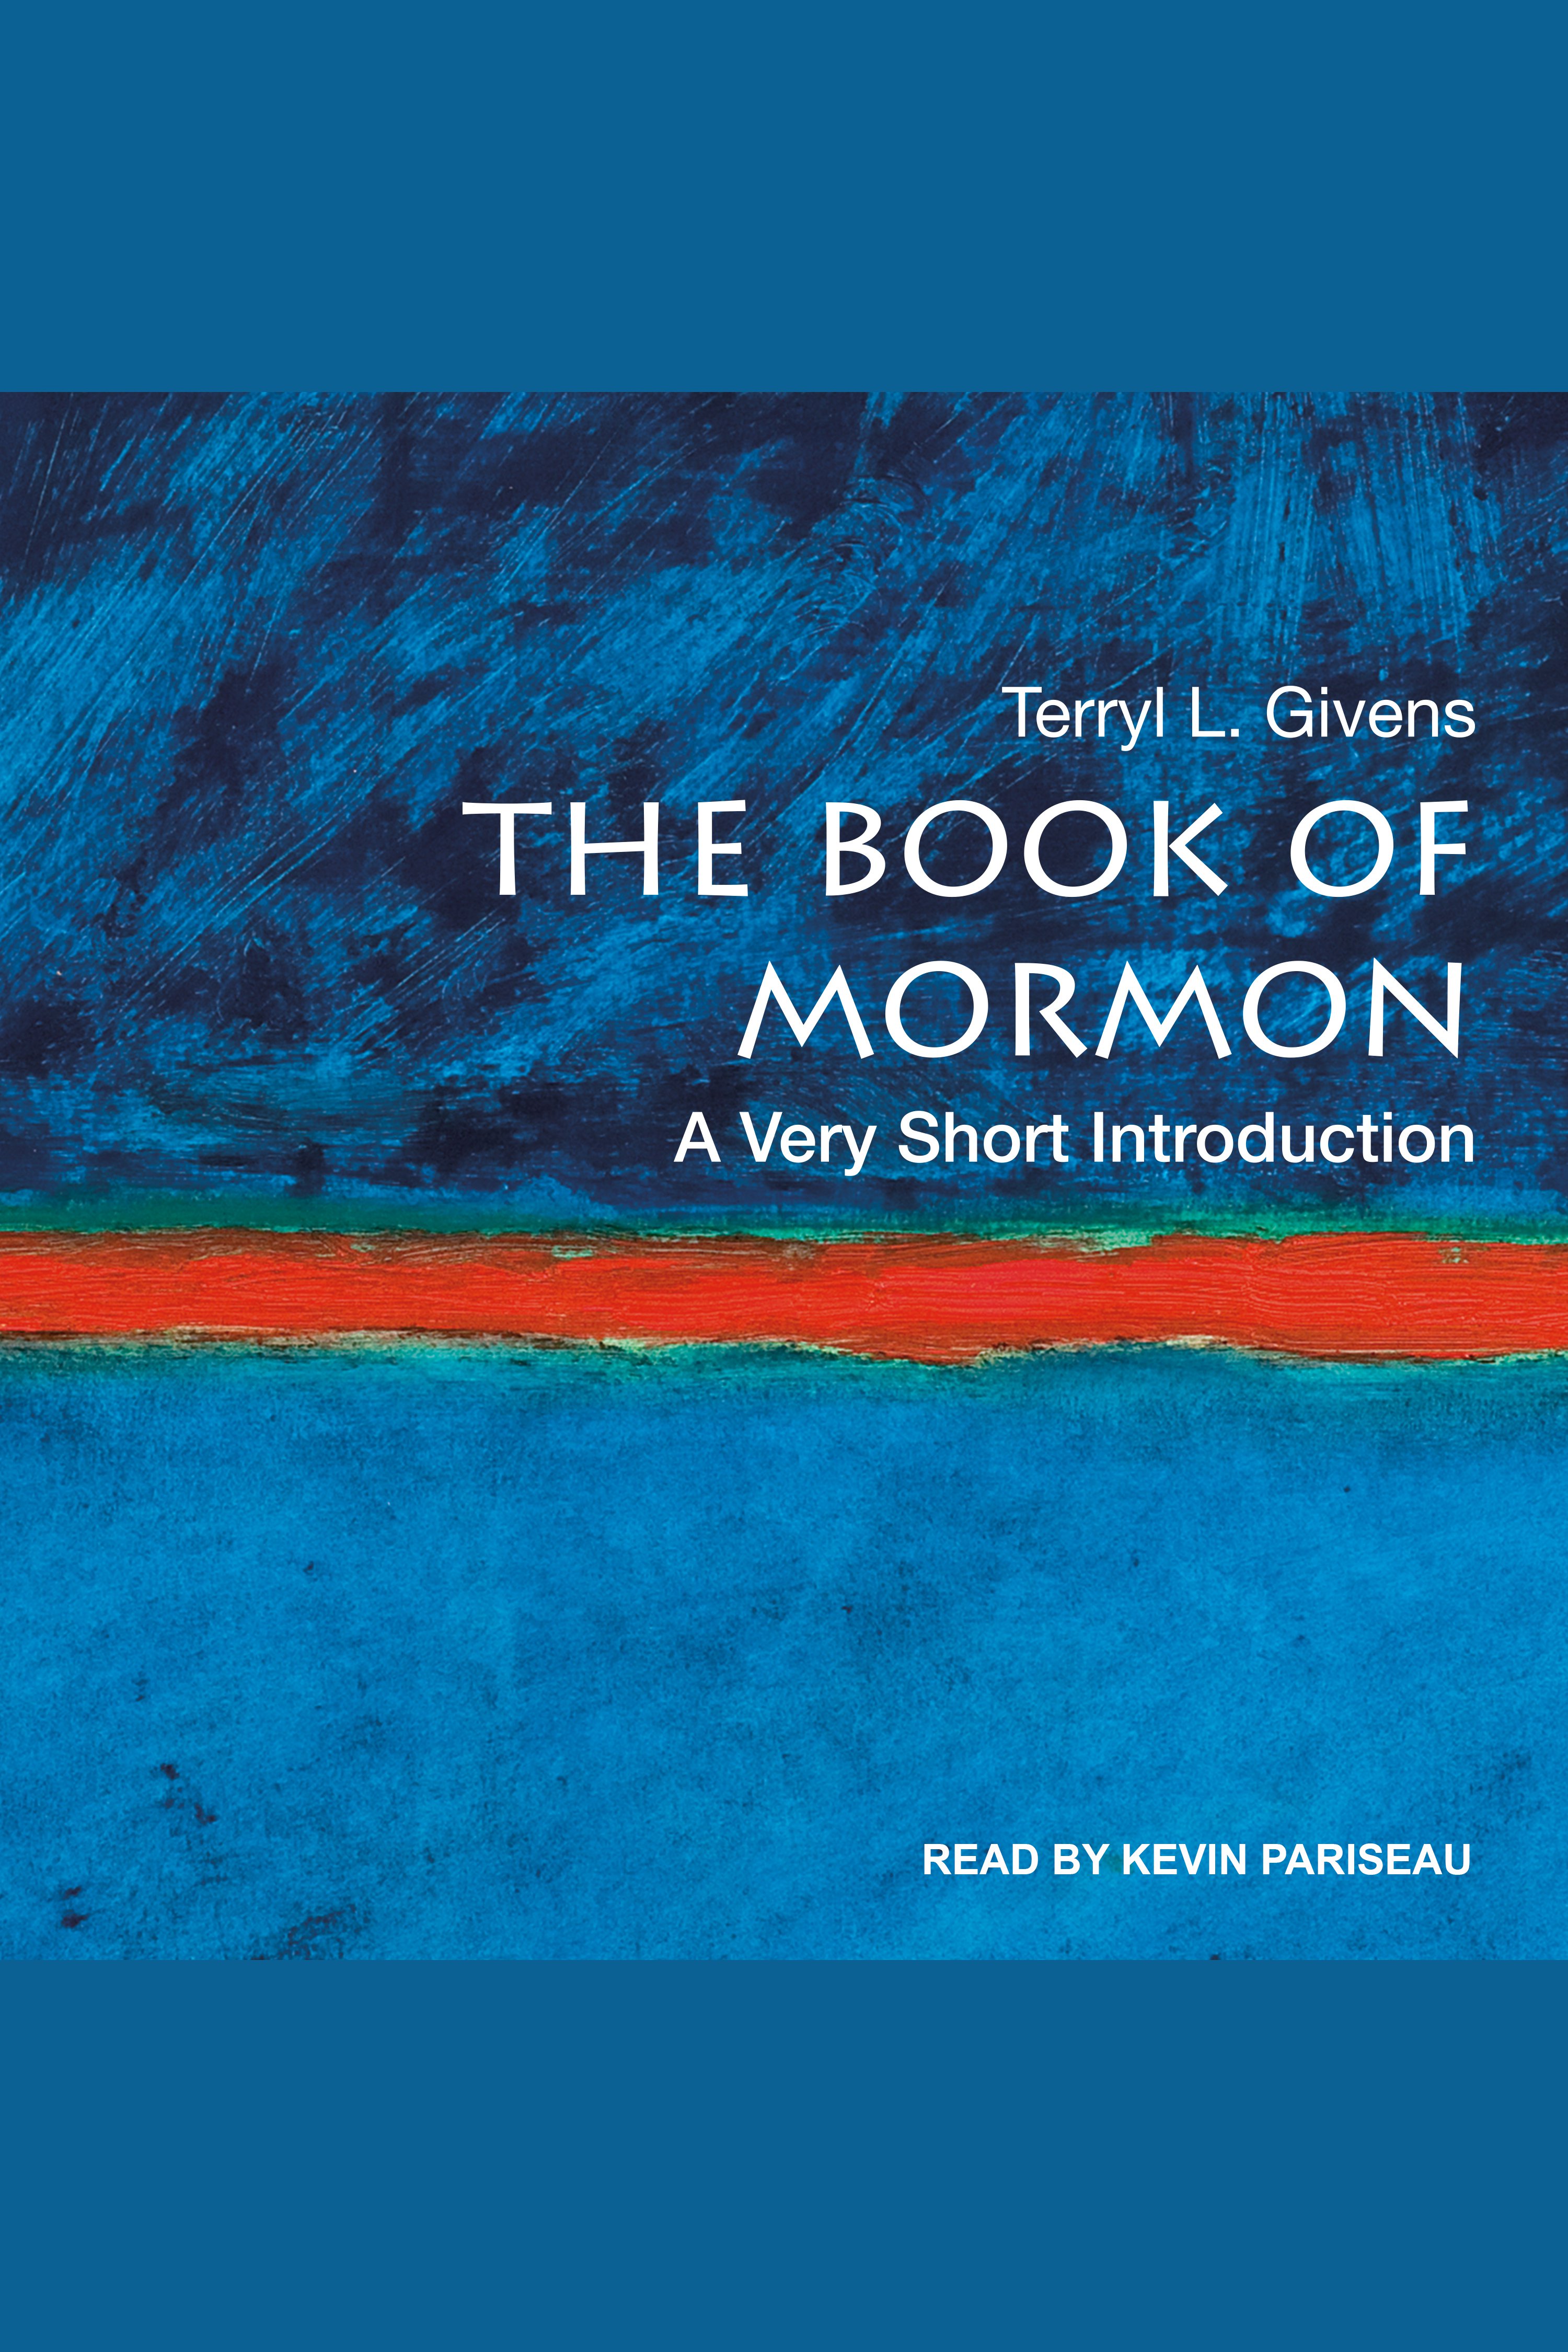 Book of Mormon, The A Very Short Introduction